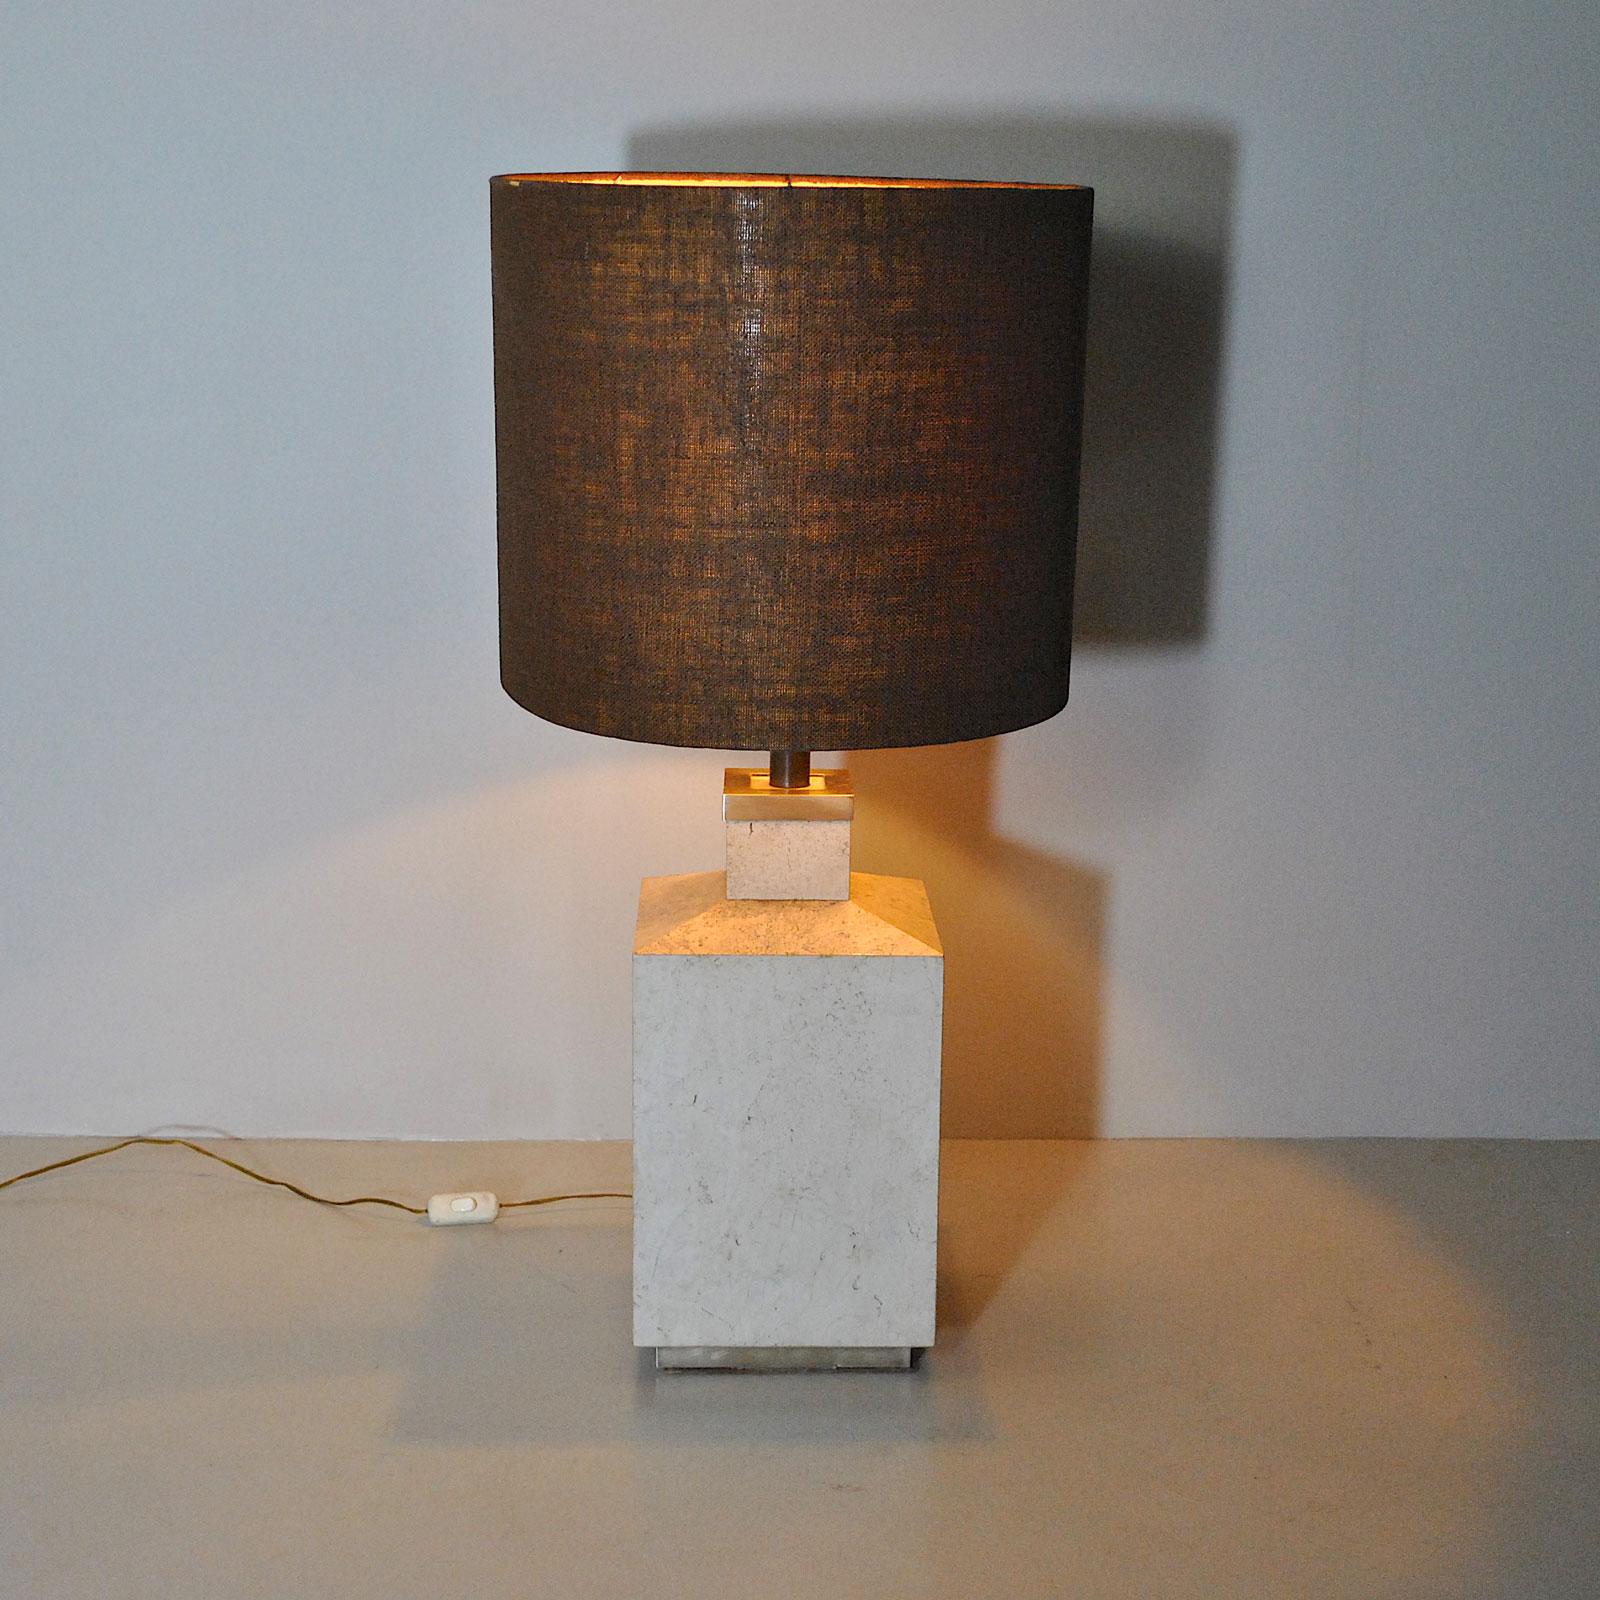 Italian Midcentury Table Lamp Form the 1970s For Sale 3